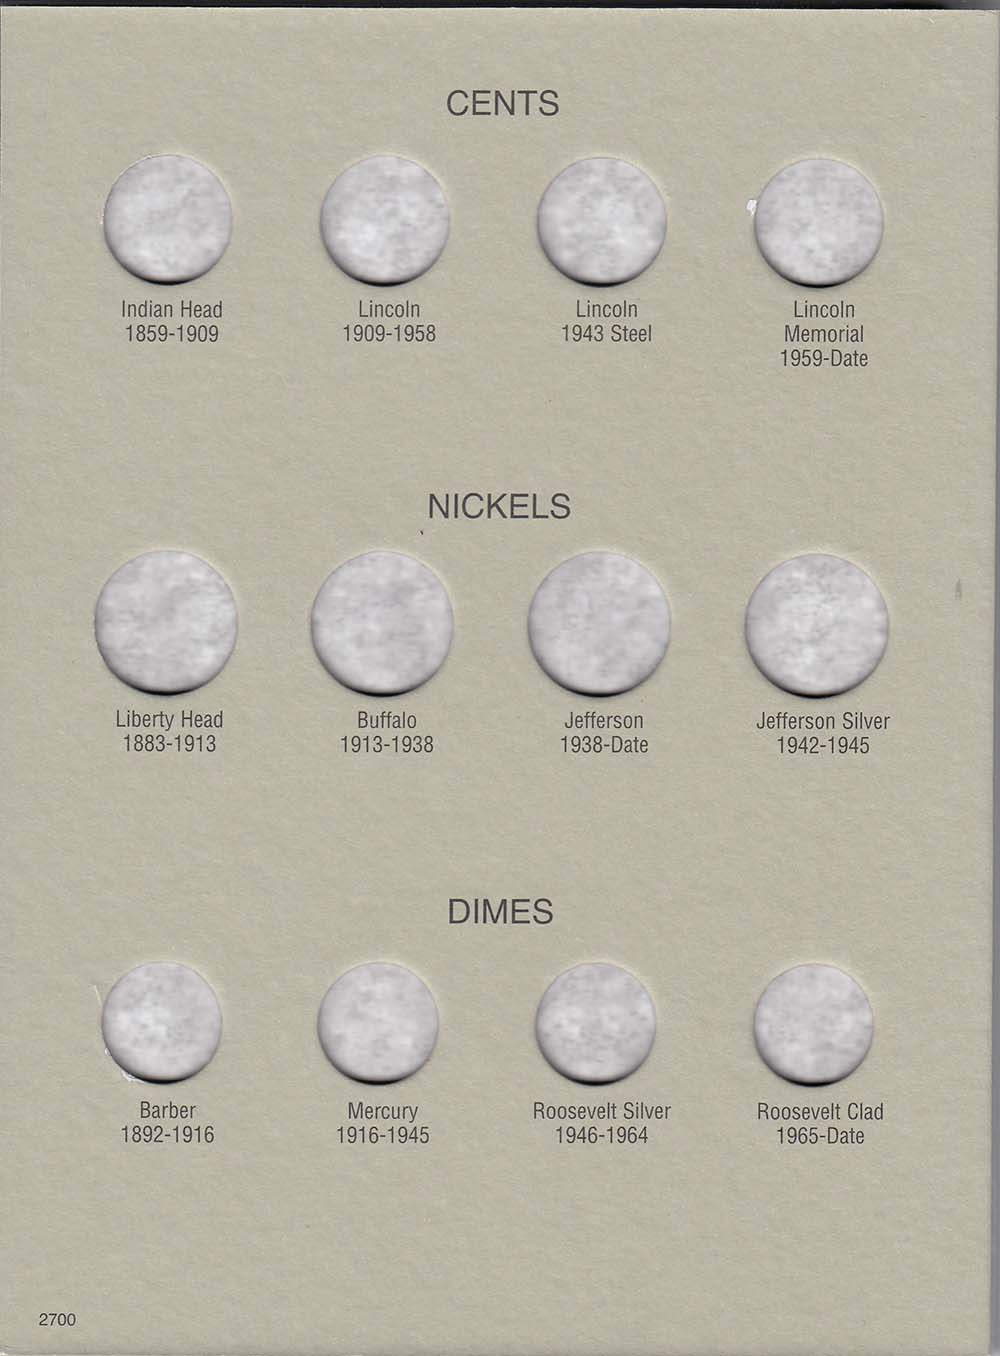 COINS FROM PAGE 1 OF 1892-1916 BARBER DIME FOLDER